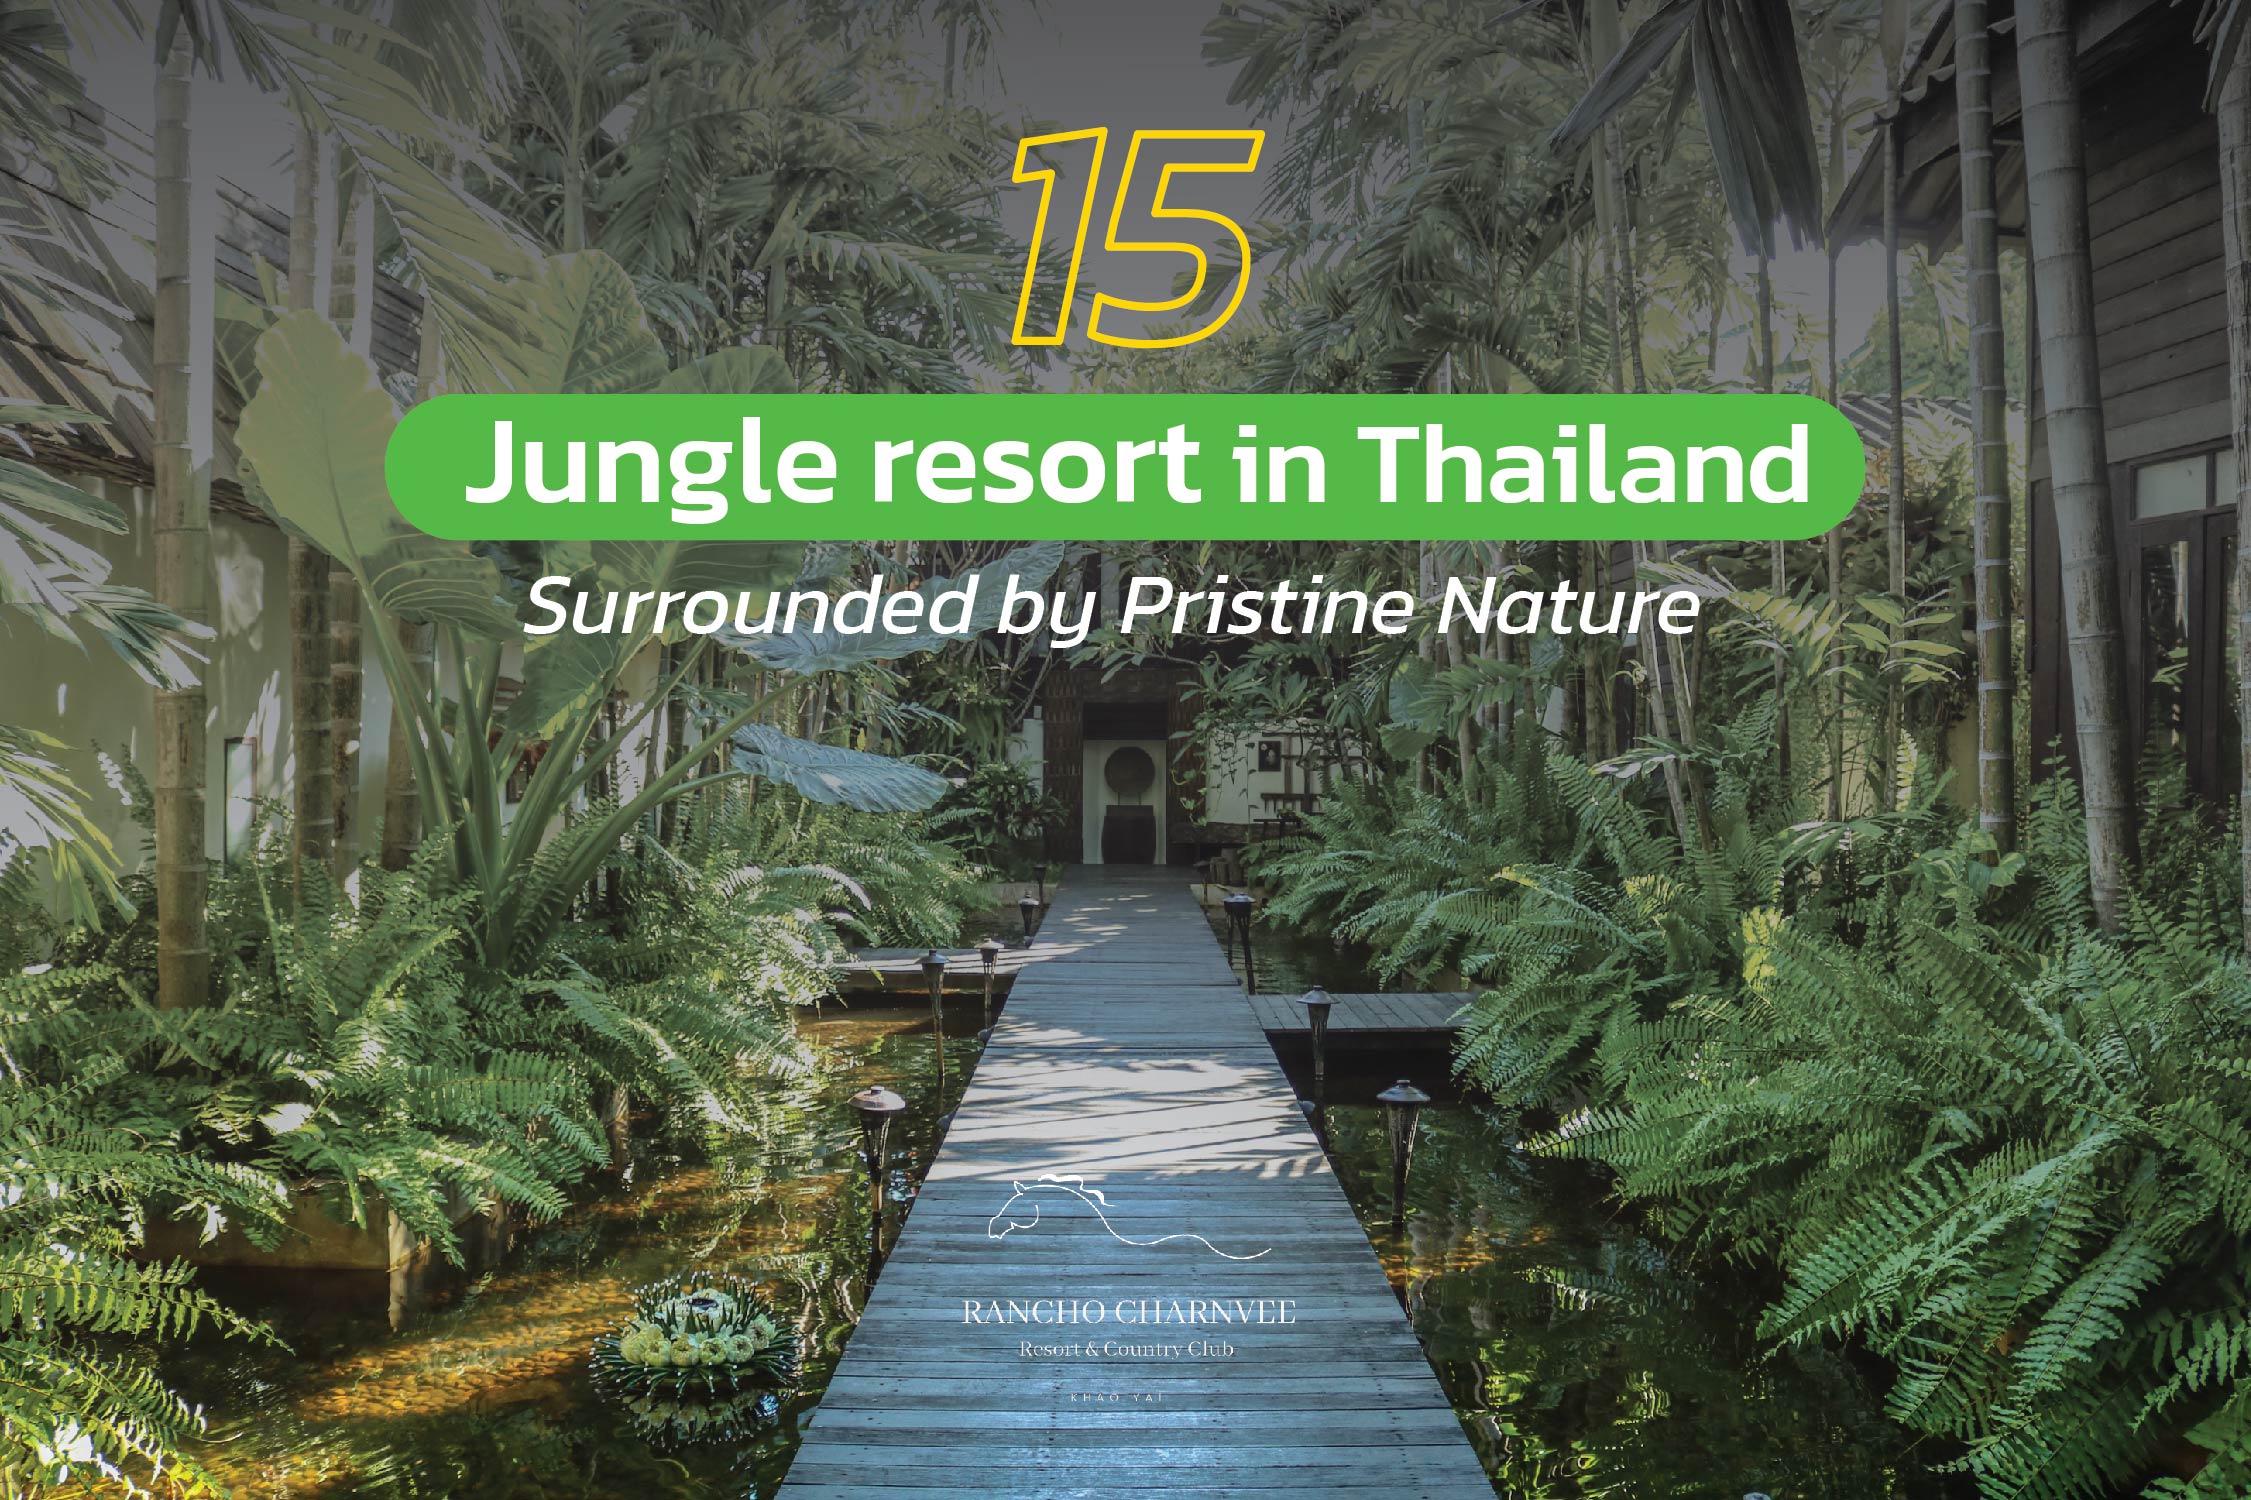 15 Jungle resort in Thailand Surrounded by Pristine Nature